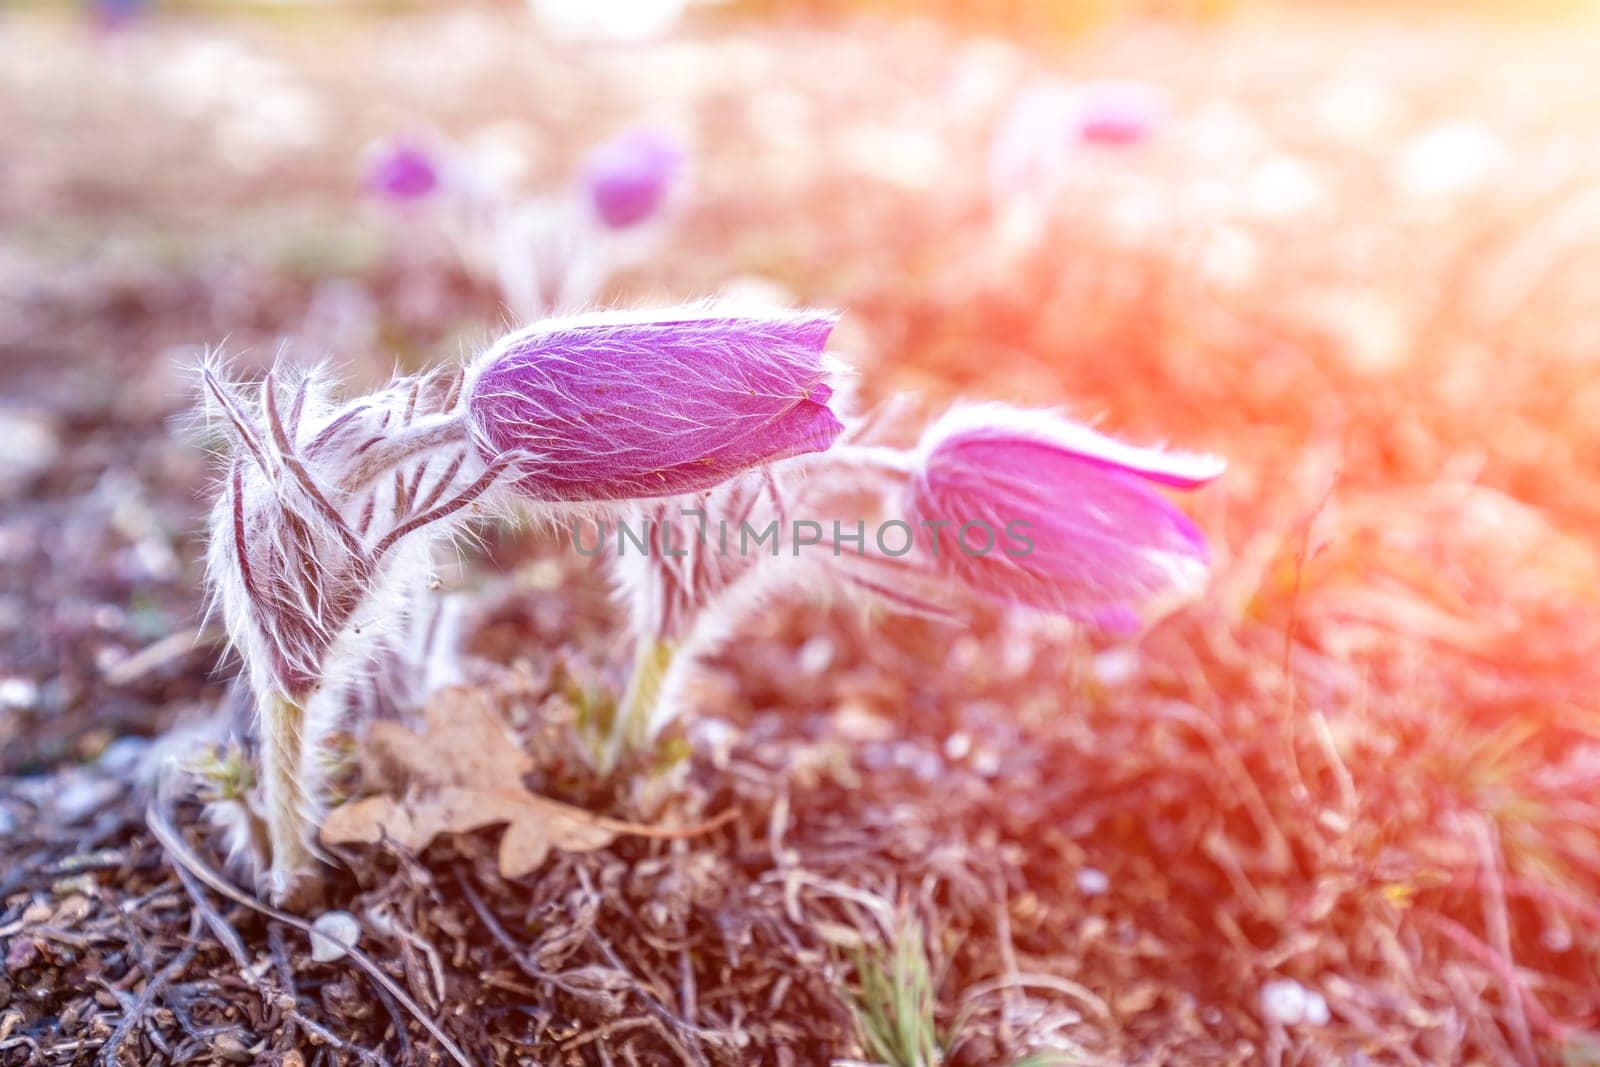 Dream grass is the most beautiful spring flower. Pulsatilla blooms in early spring in forests and mountains. Purple pulsatilla flowers close up in the snow by Matiunina